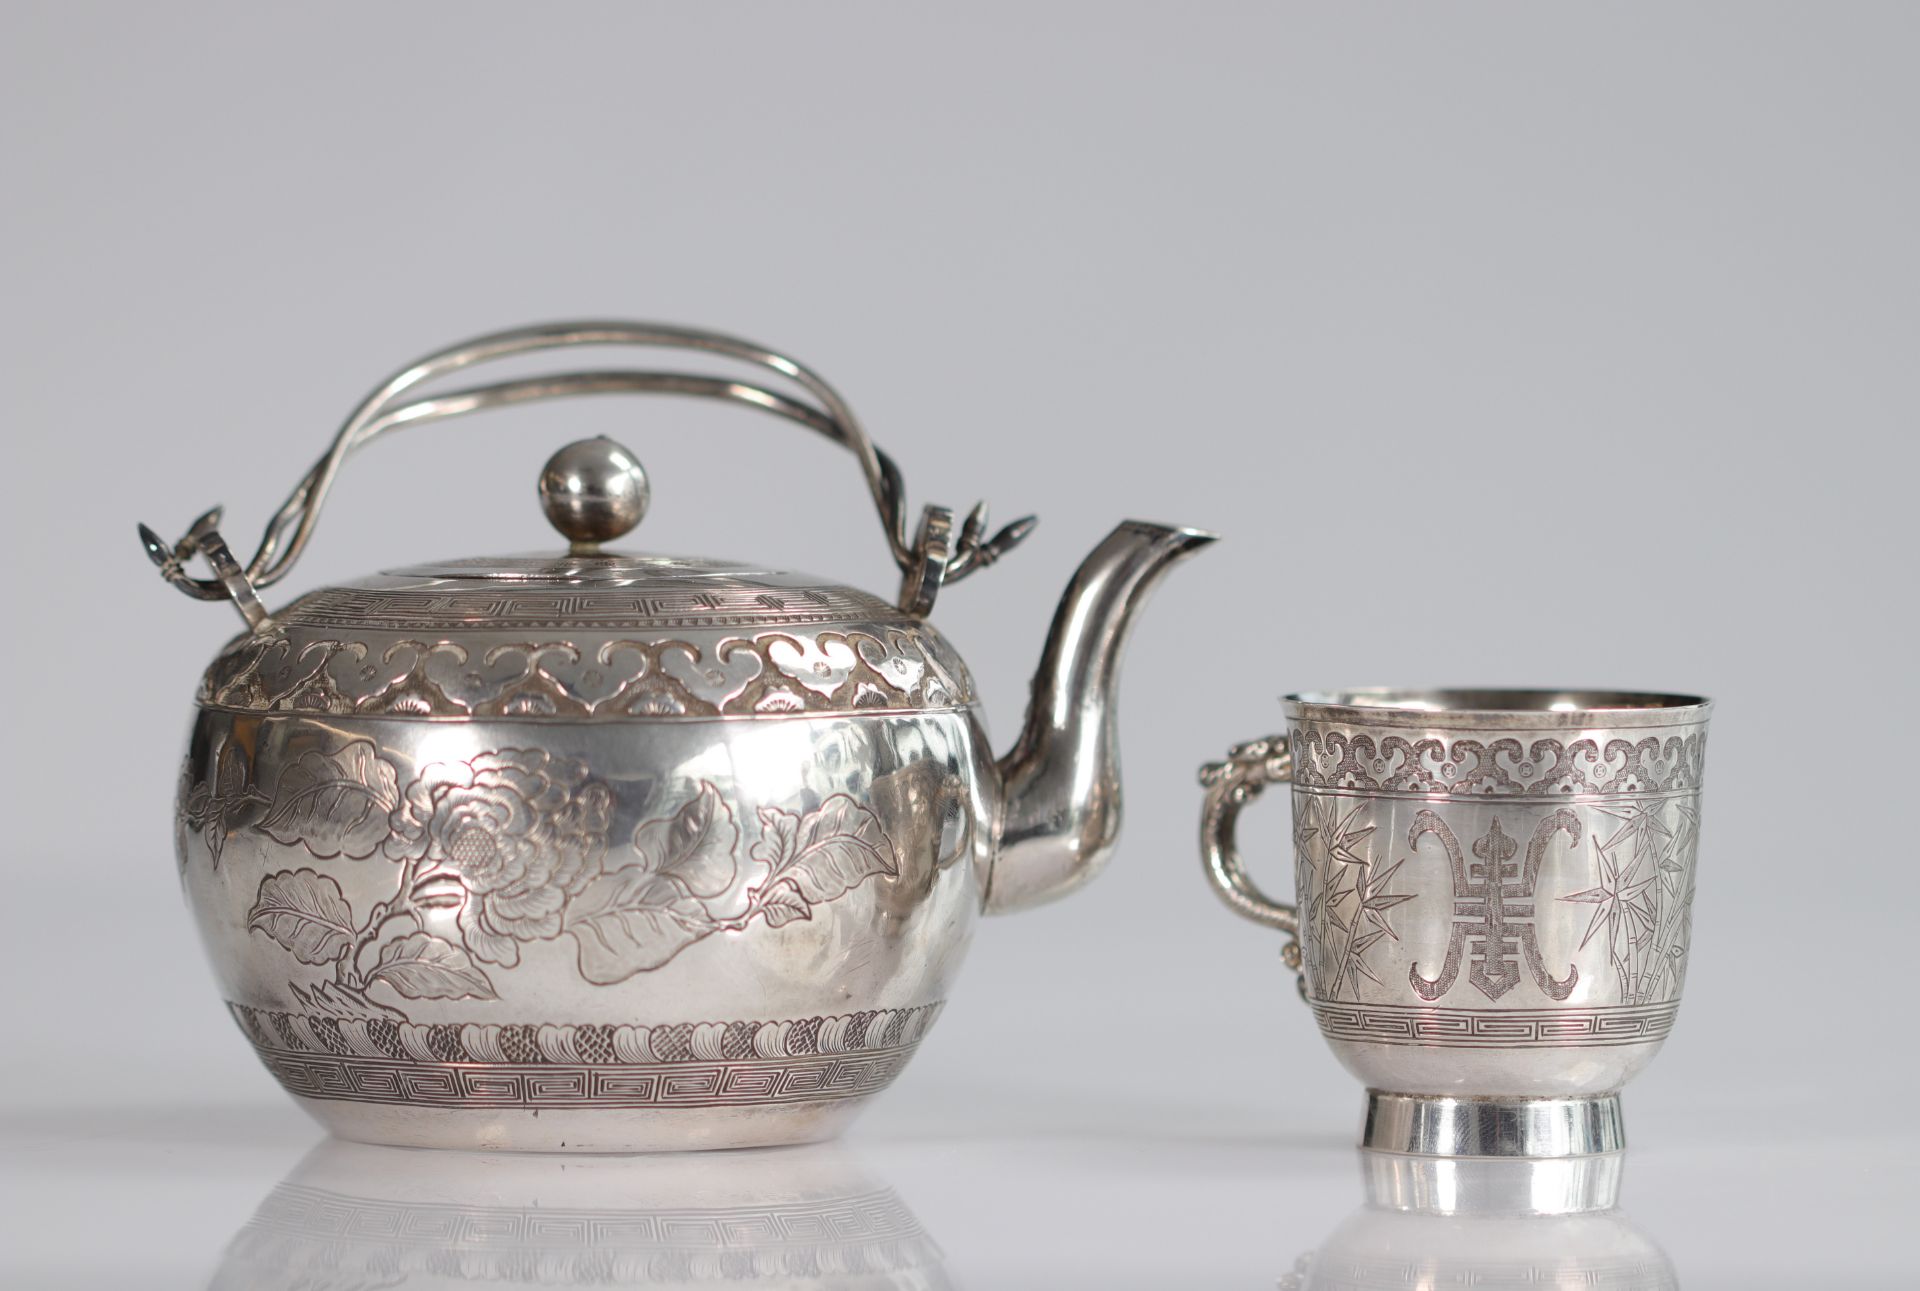 China silver teapot and cup